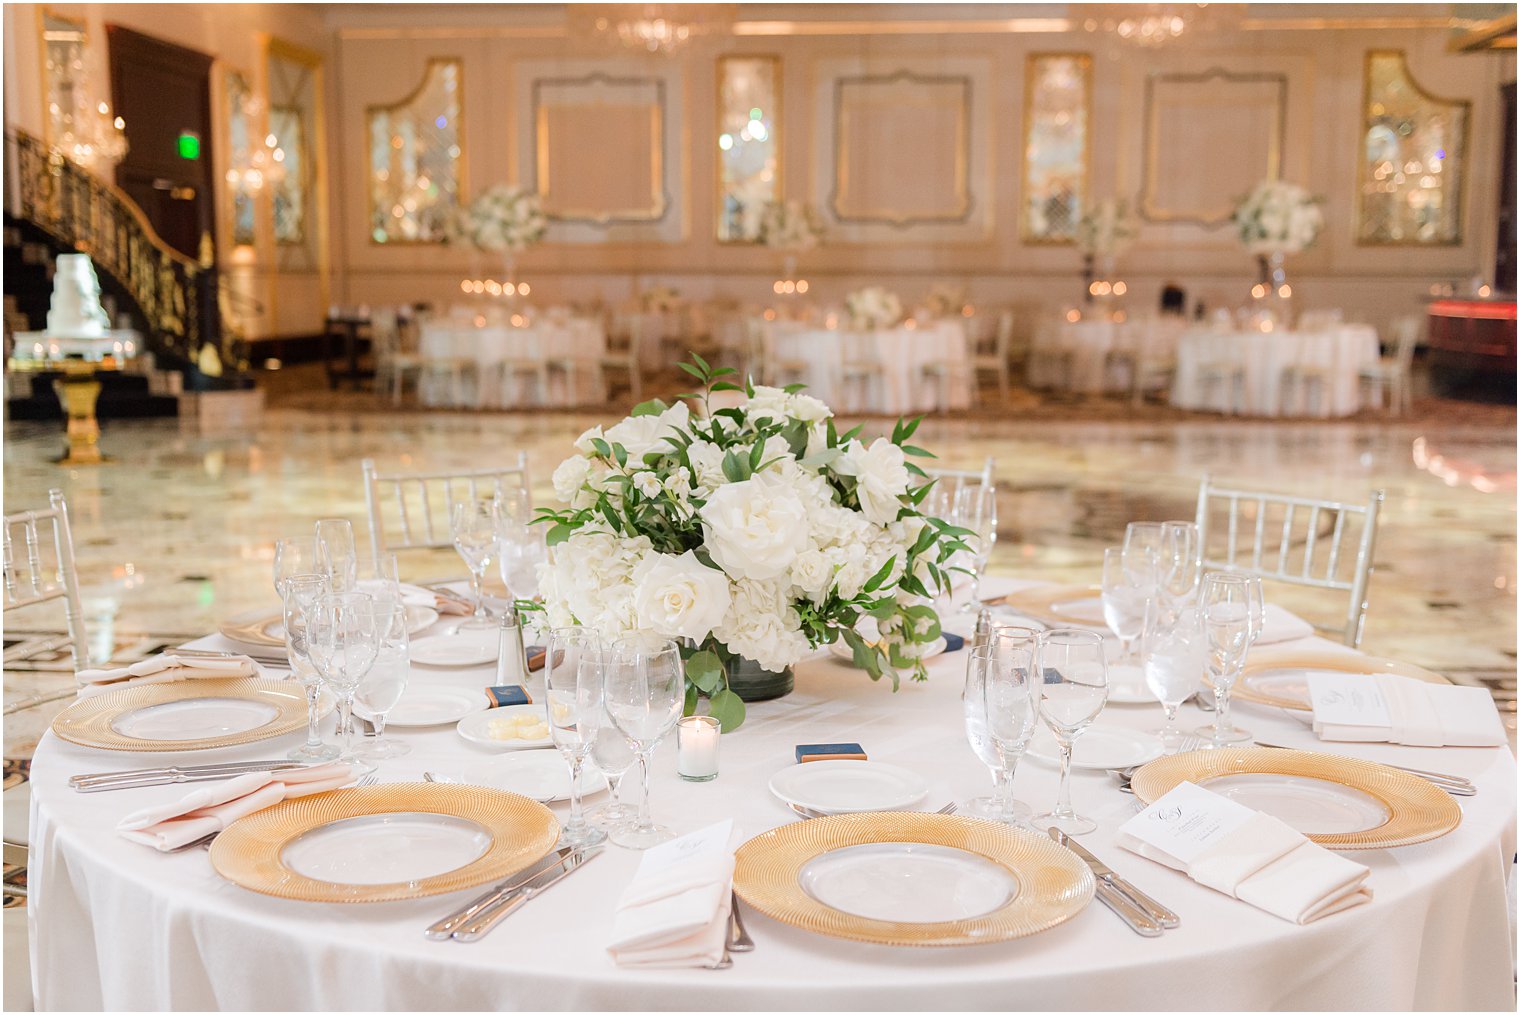 place settings with gold rimmed plates